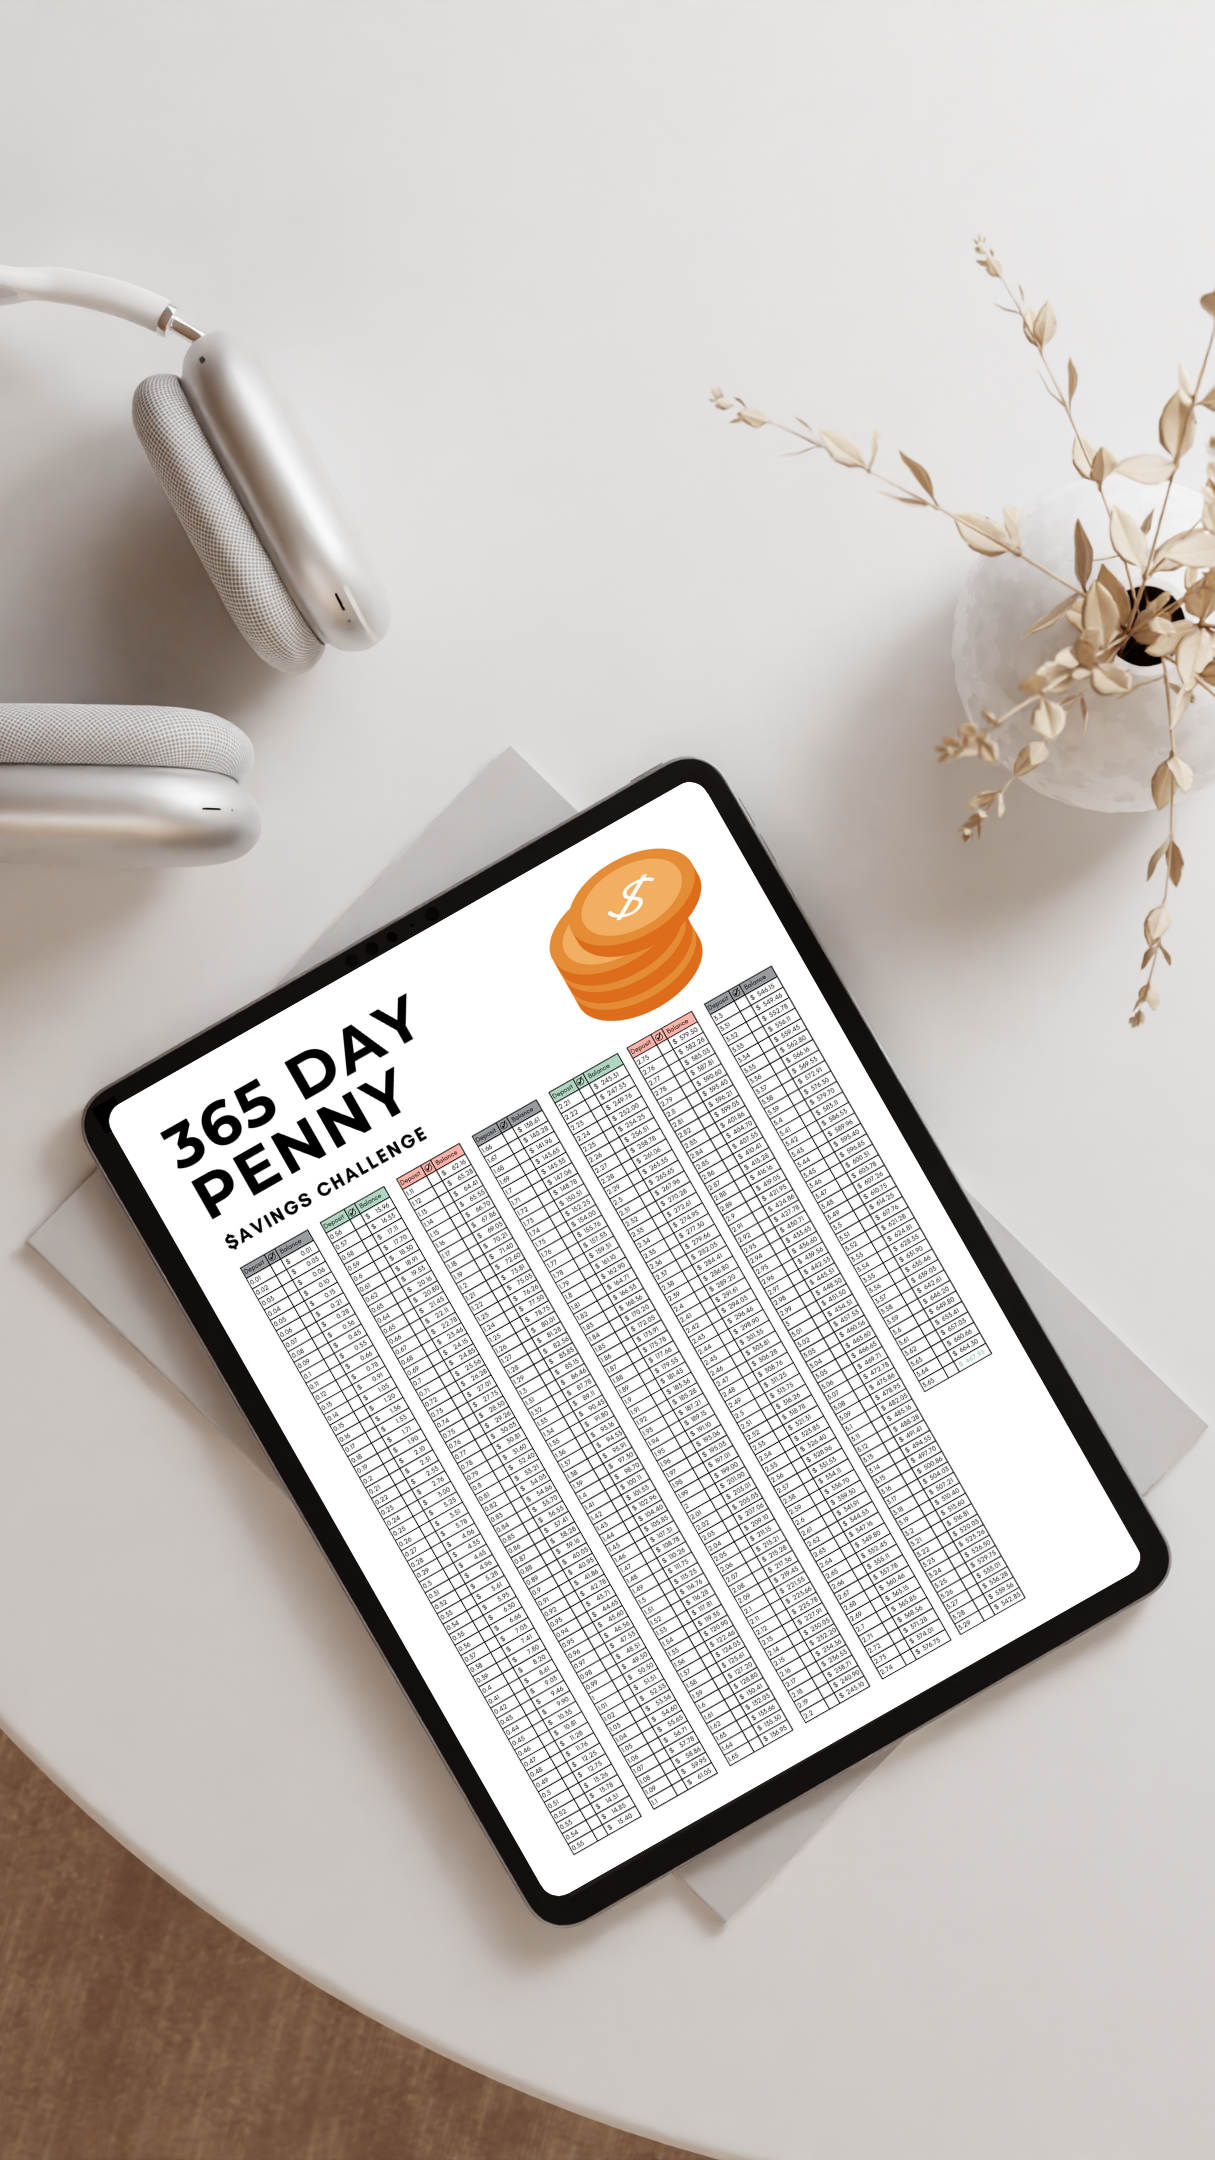 The penny savings challenge is the perfect money challenge for tight budgets. Download the free printable savings tracker to get started today.